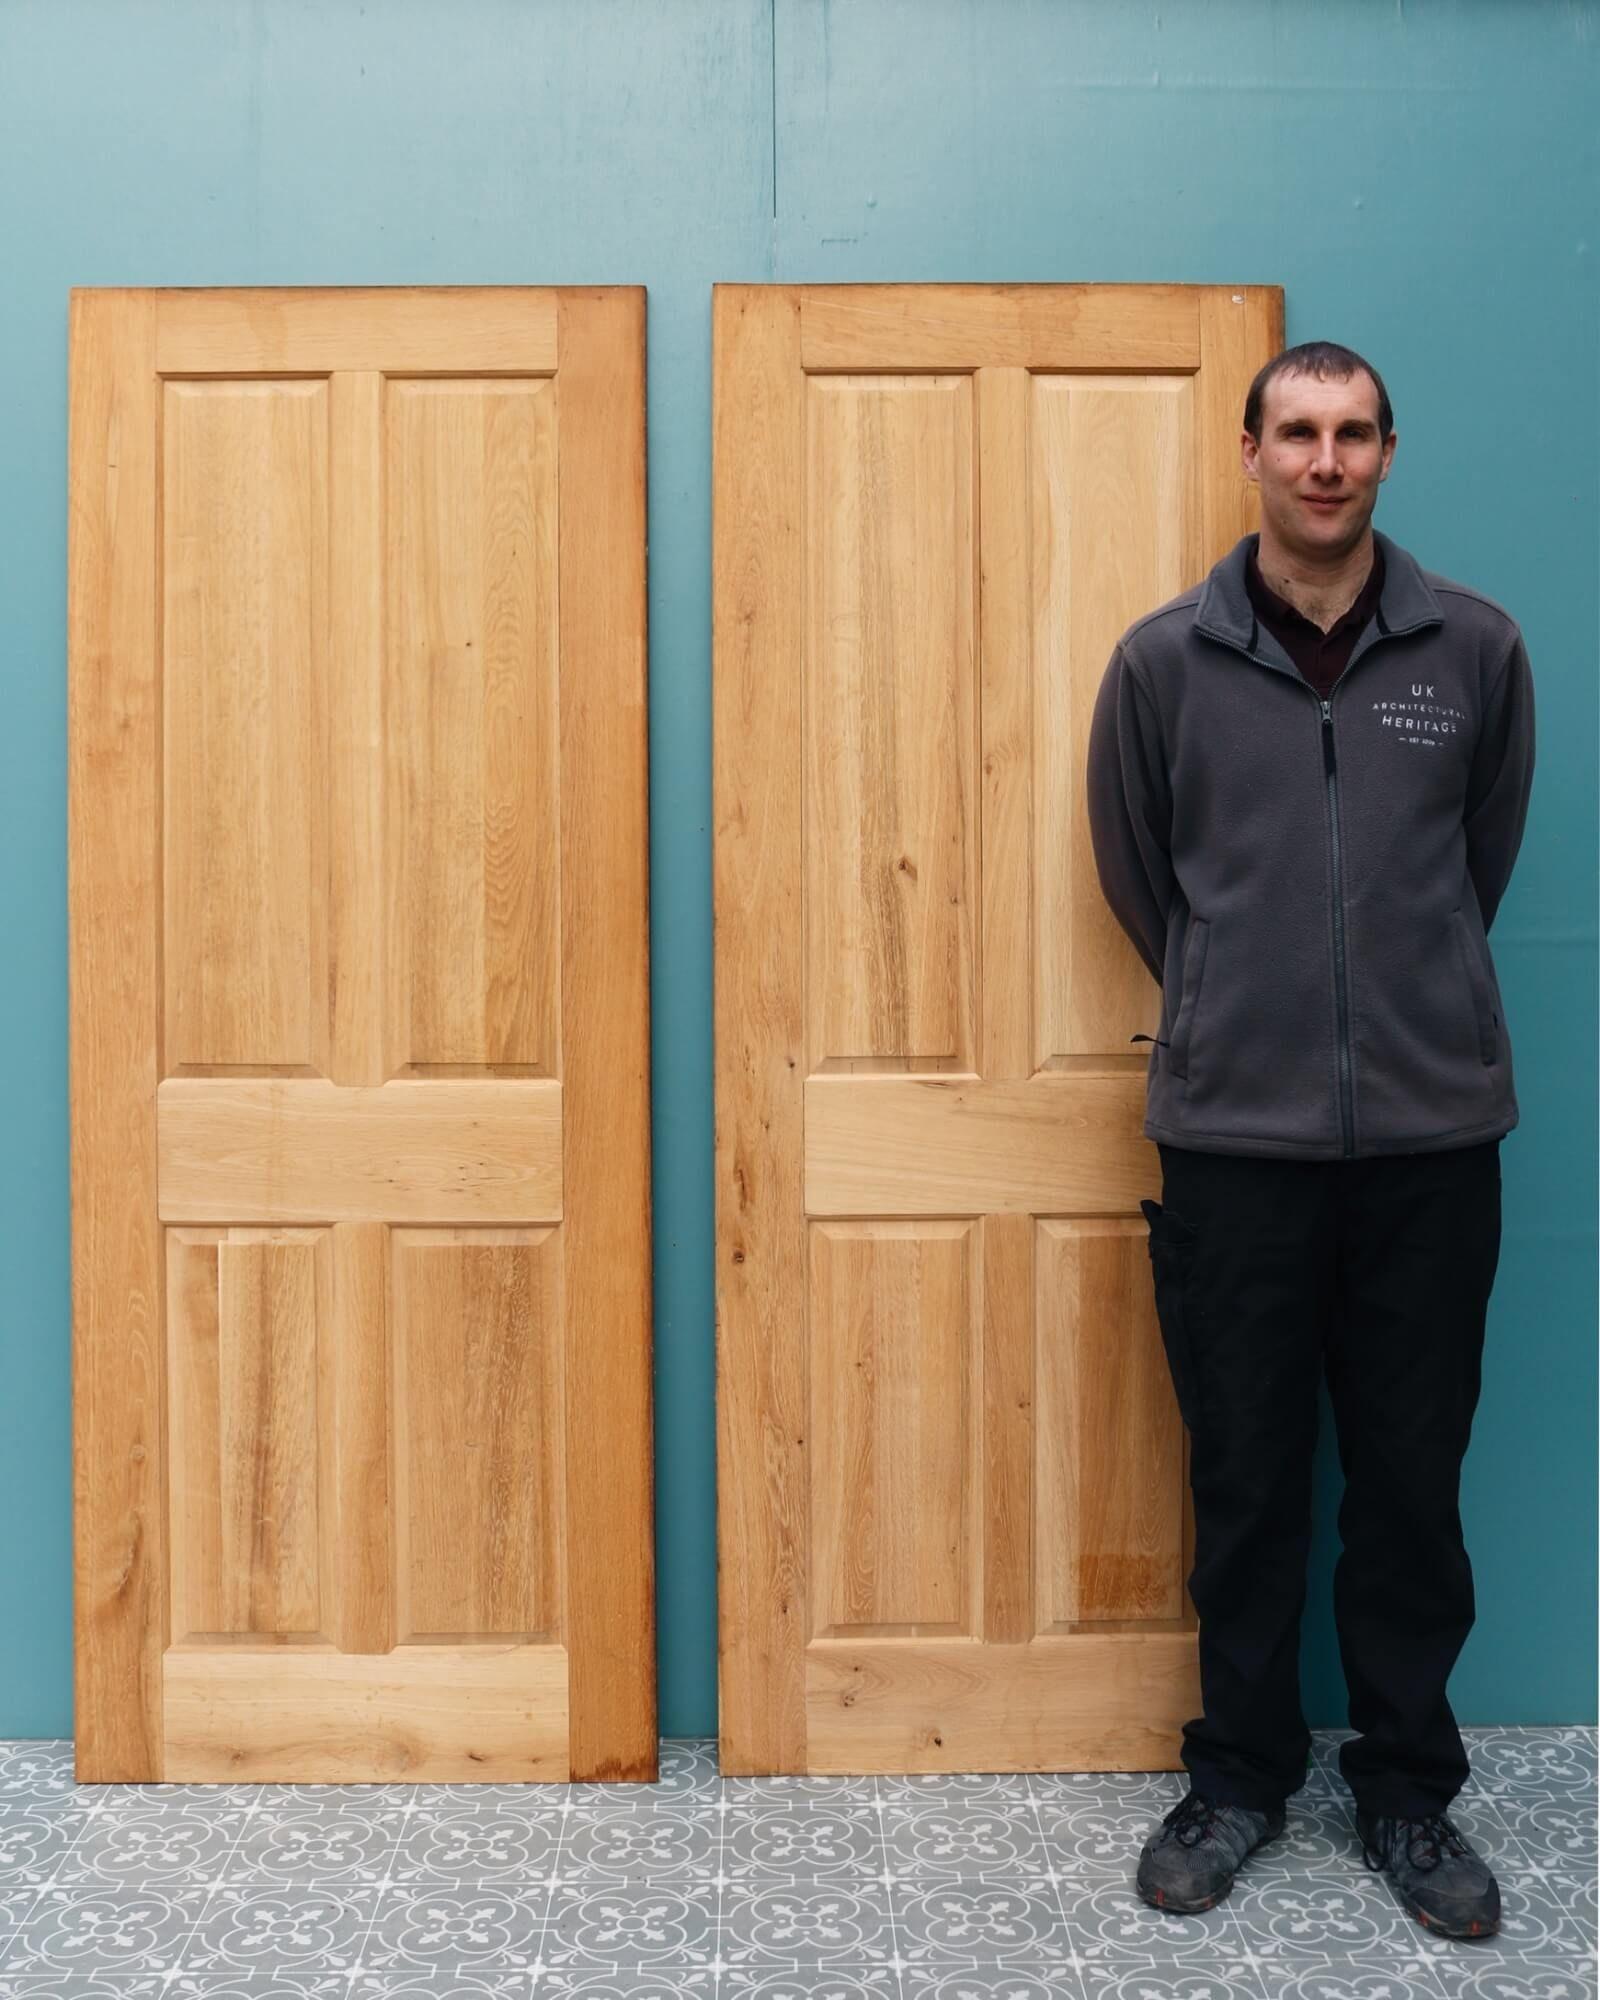 A set of 5 reclaimed 4-panel oak interior doors dating from the early 21st century. Perfect for a restoration project, these 5 doors are made from solid oak with a bare wood finish. They each feature 4 raised and fielded panels to the front and